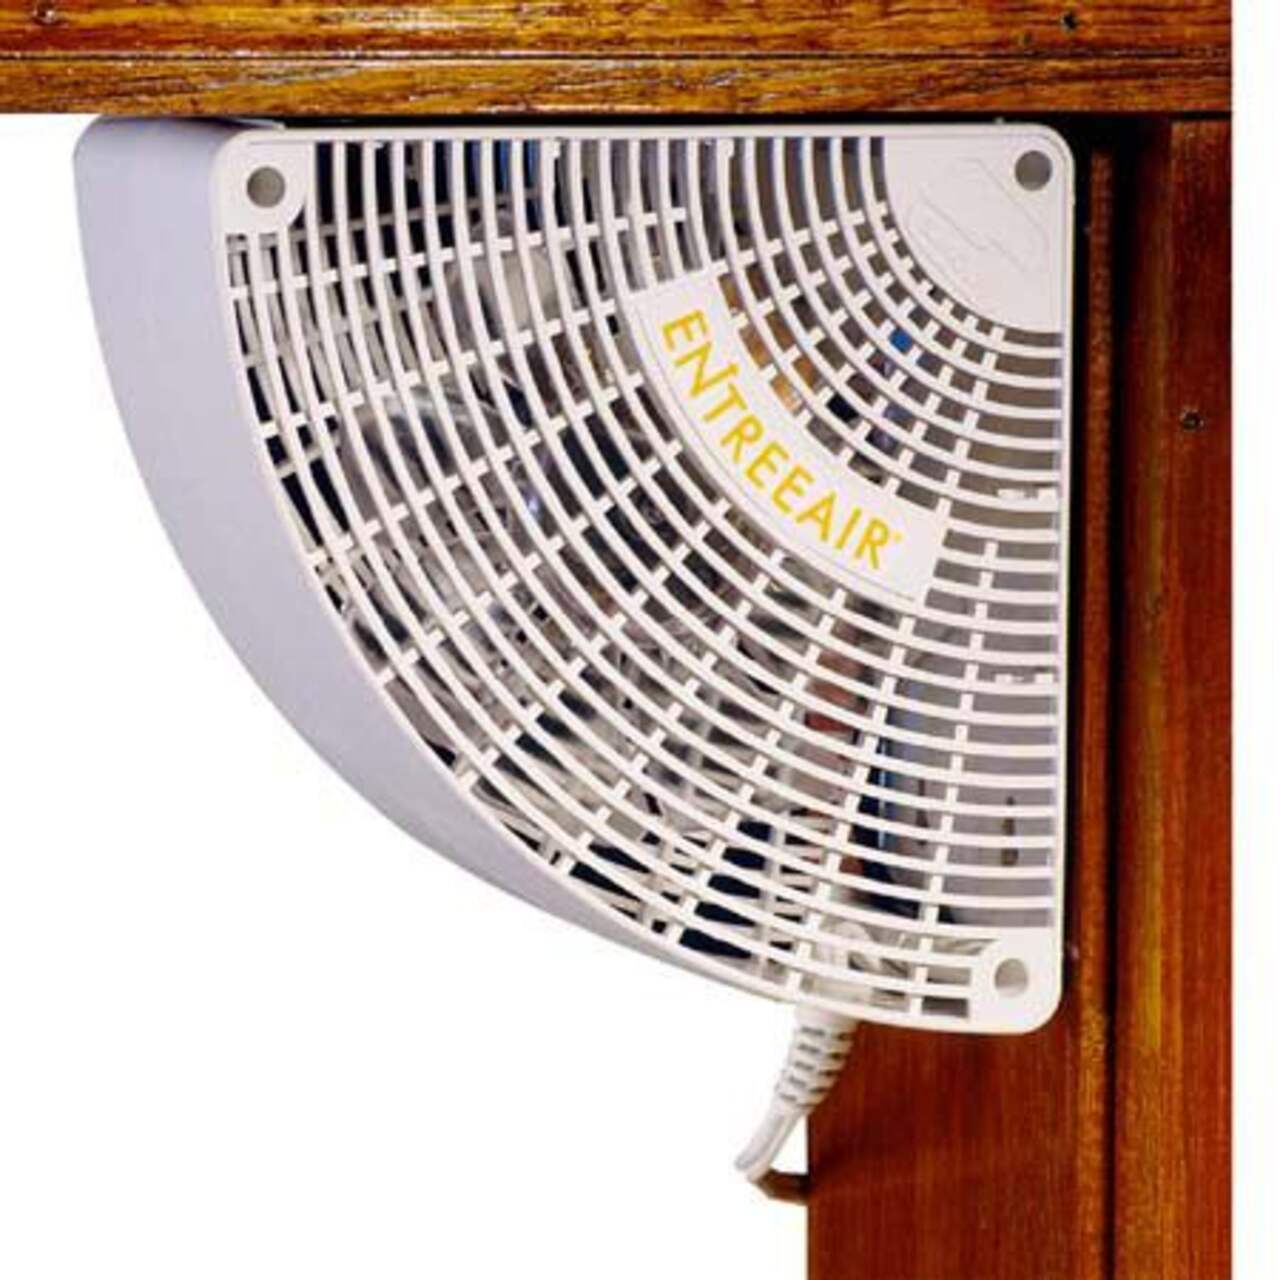 https://media-www.canadiantire.ca/product/fixing/home-environment/home-air-quality-accessories/0643061/fan-door-frame-187f1052-8465-46d2-8075-13e45feb513f-jpgrendition.jpg?imdensity=1&imwidth=640&impolicy=mZoom